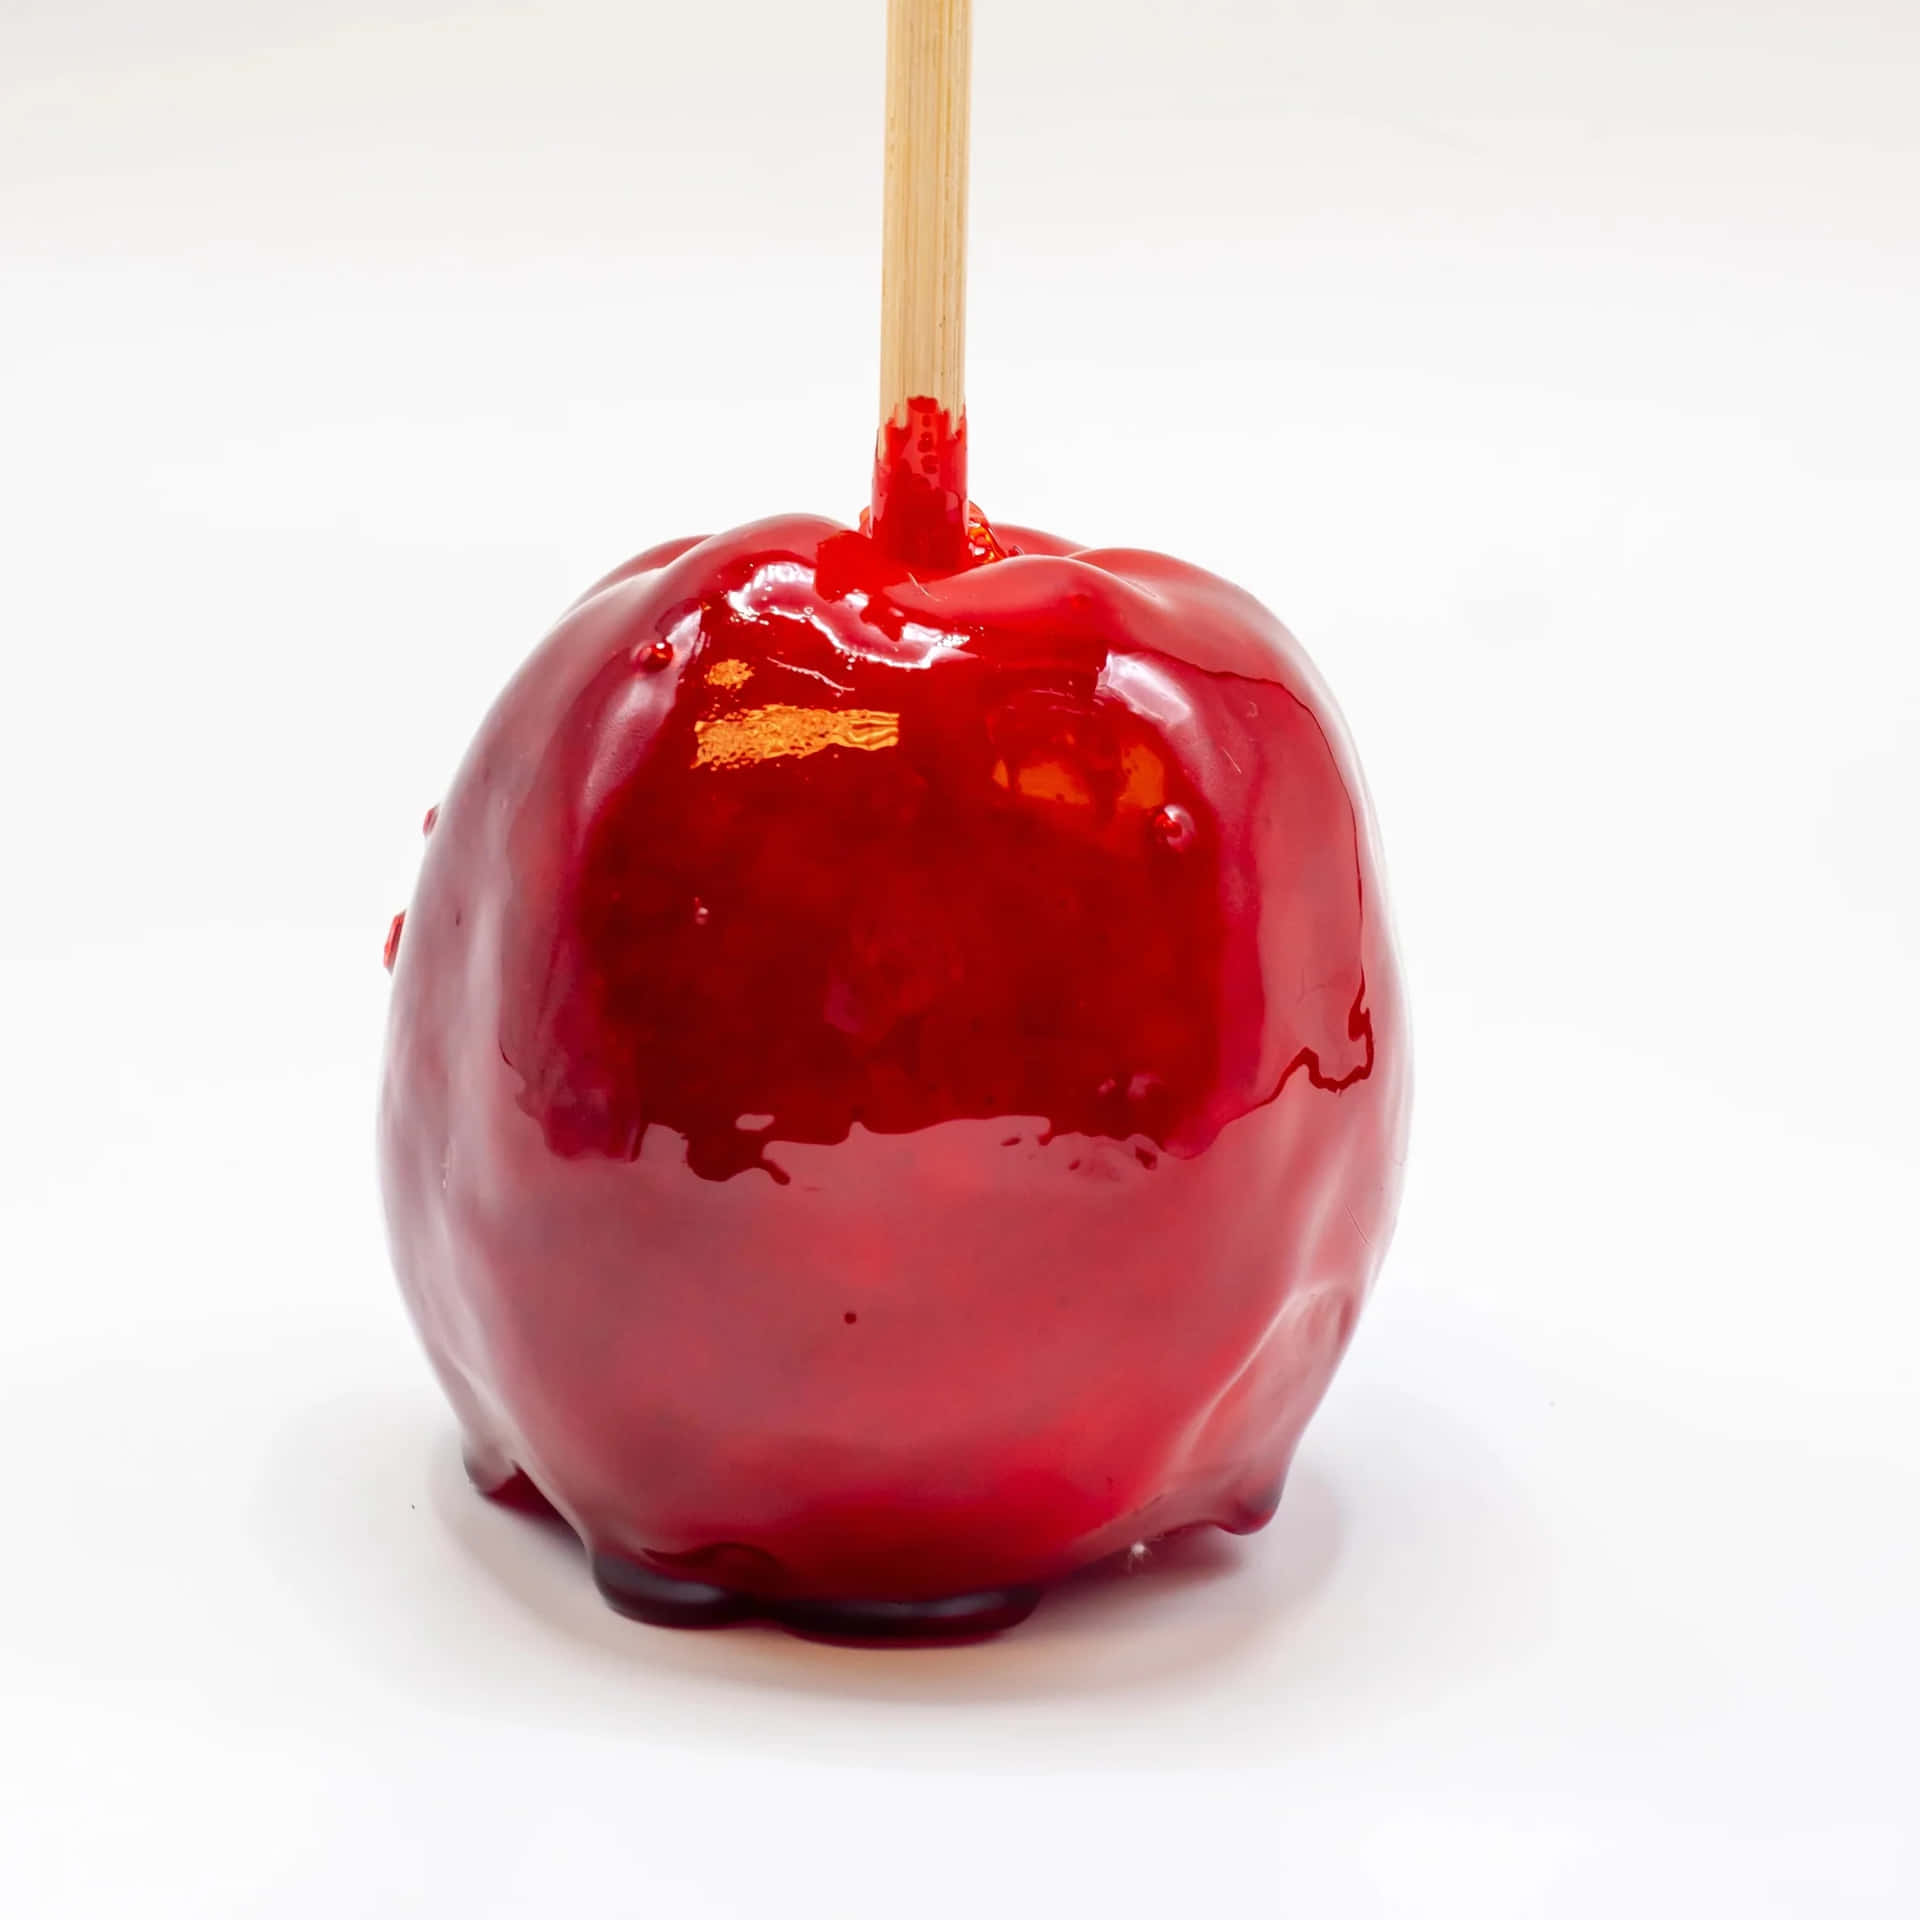 Delicious Red Candy Apples Ready for a Sweet Bite Wallpaper